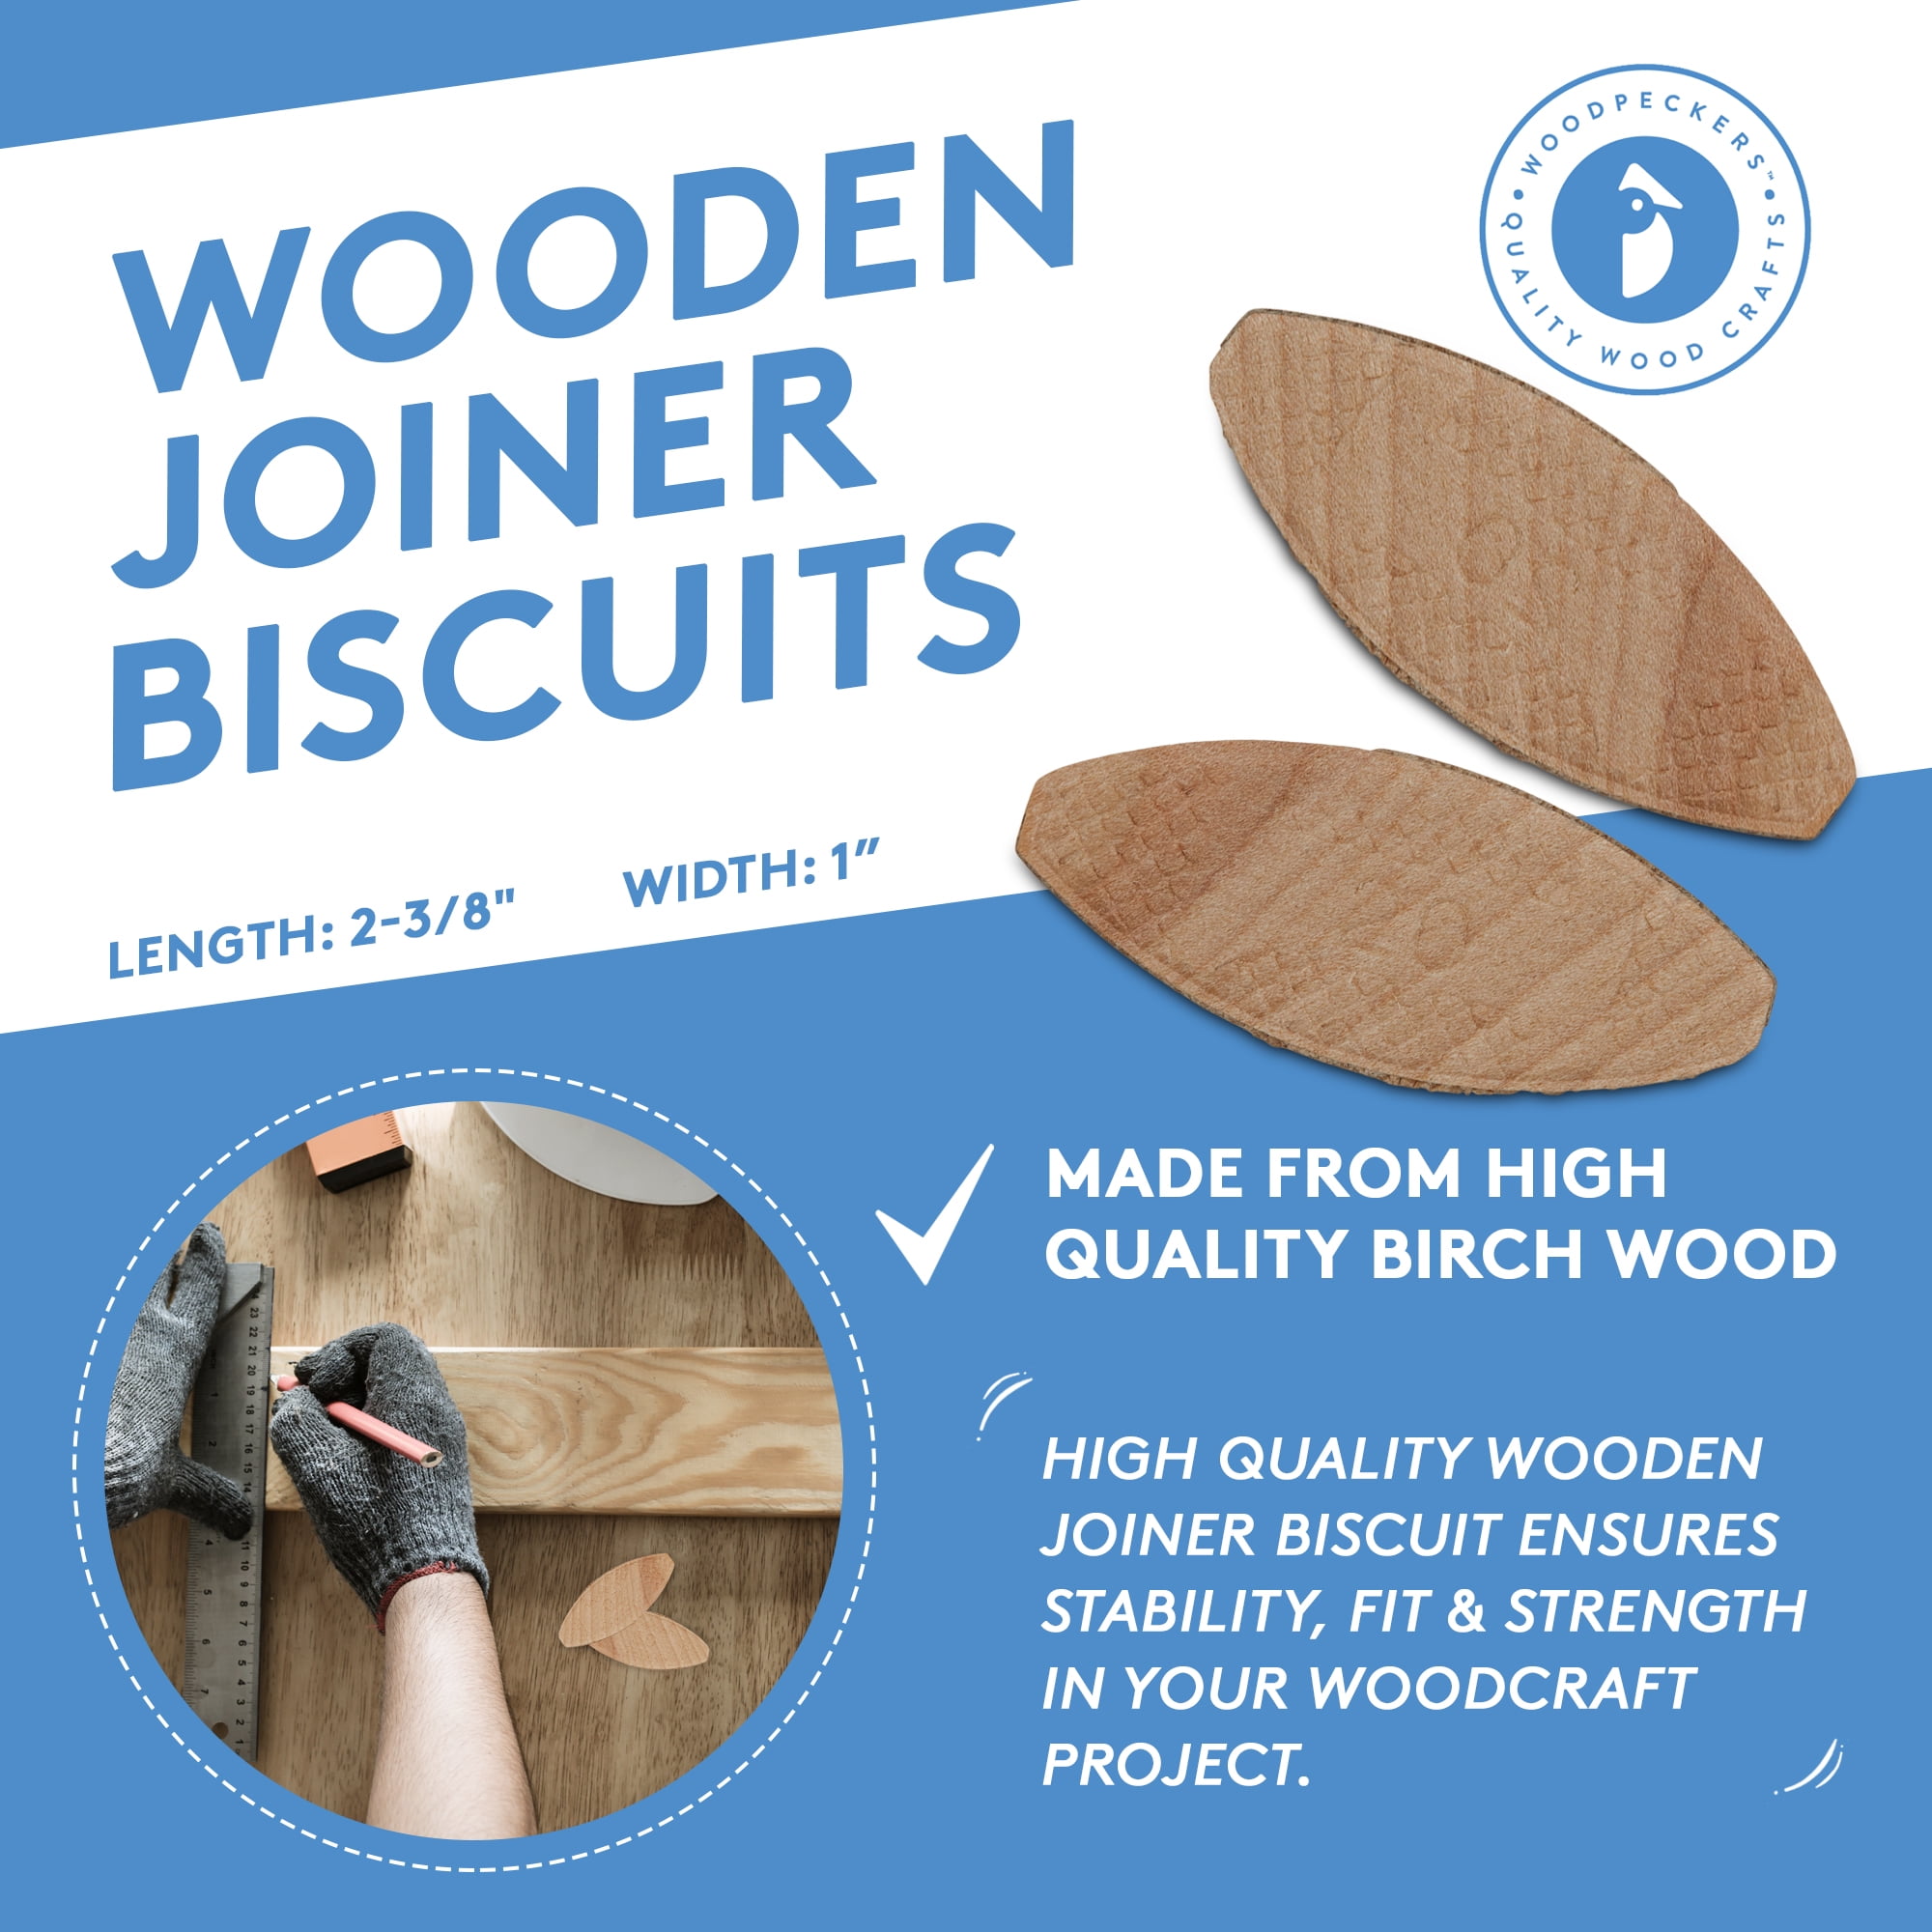 Wooden Joiner Biscuits Size 20, 100 Pieces by Woodpeckers 